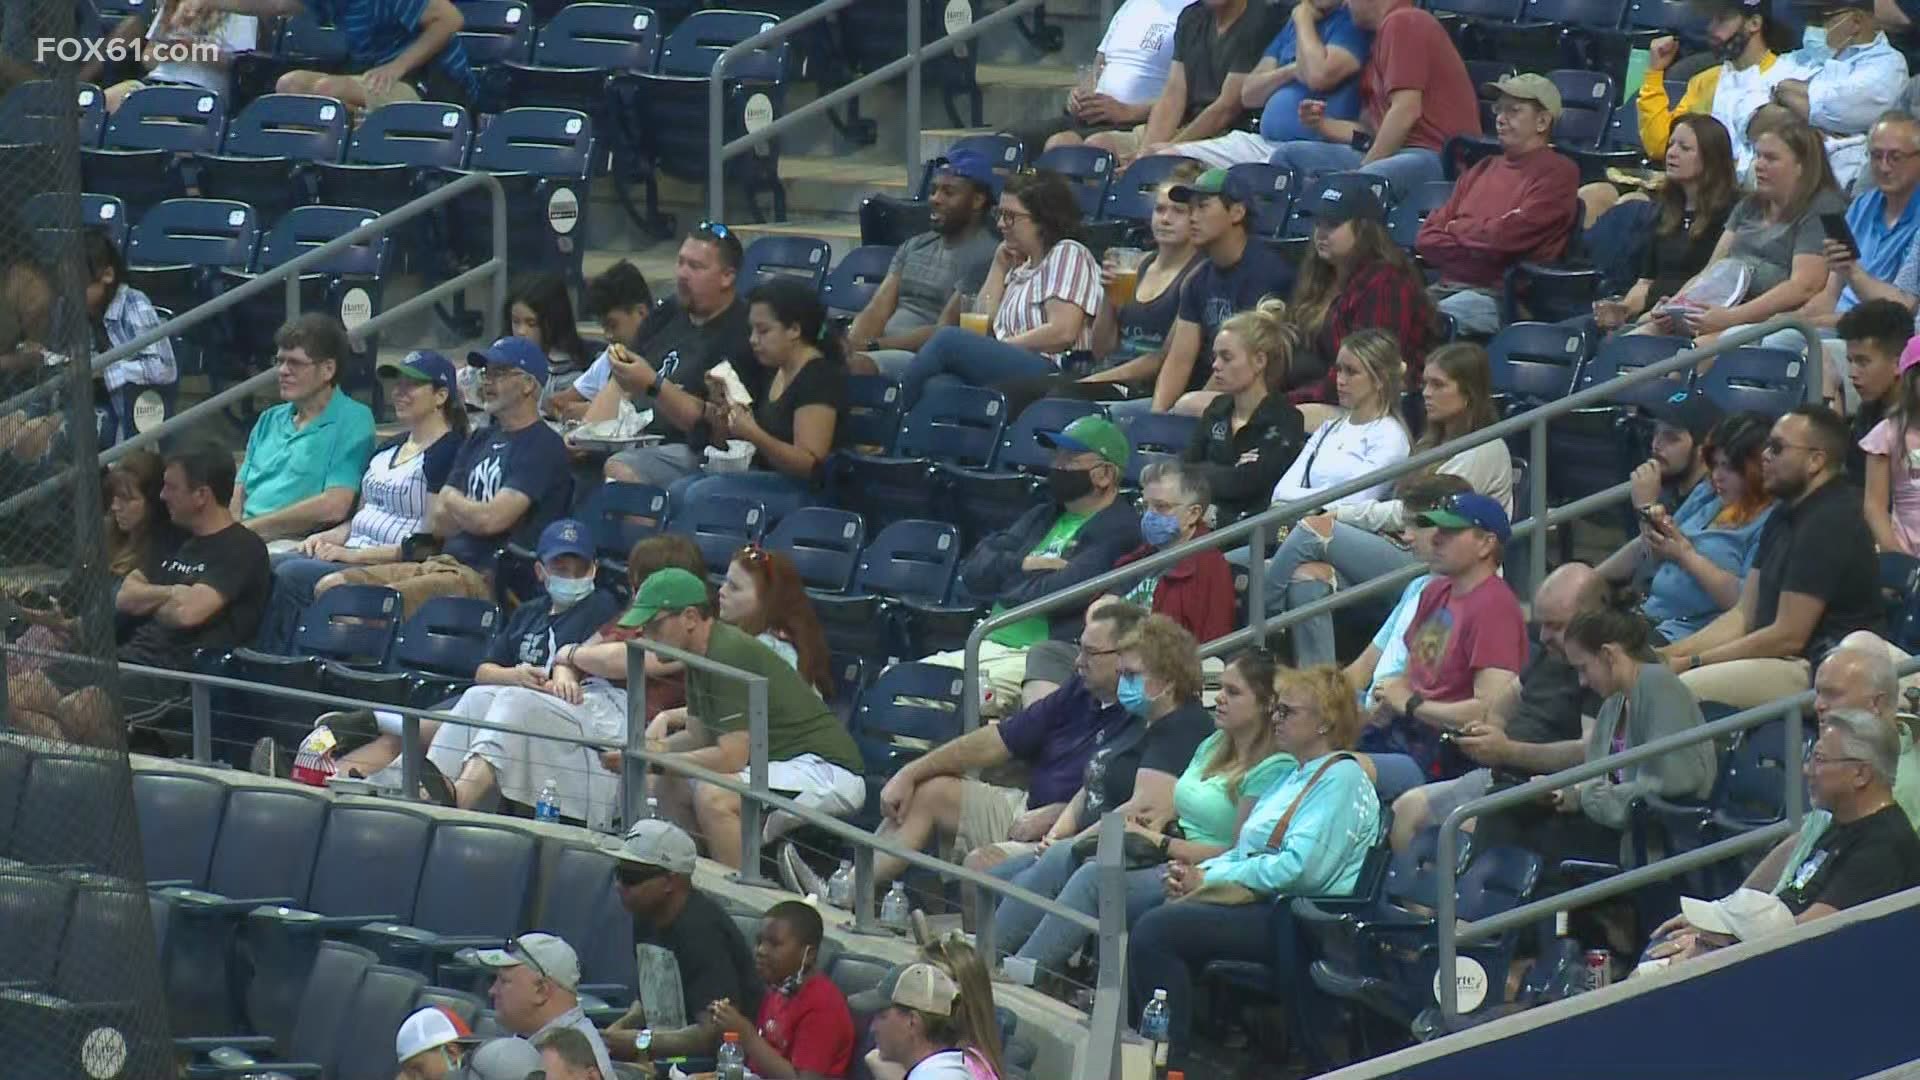 Dunkin Donuts Park is also back open at full capacity. Zip ties were removed from seats that were previously blocked off before the game.